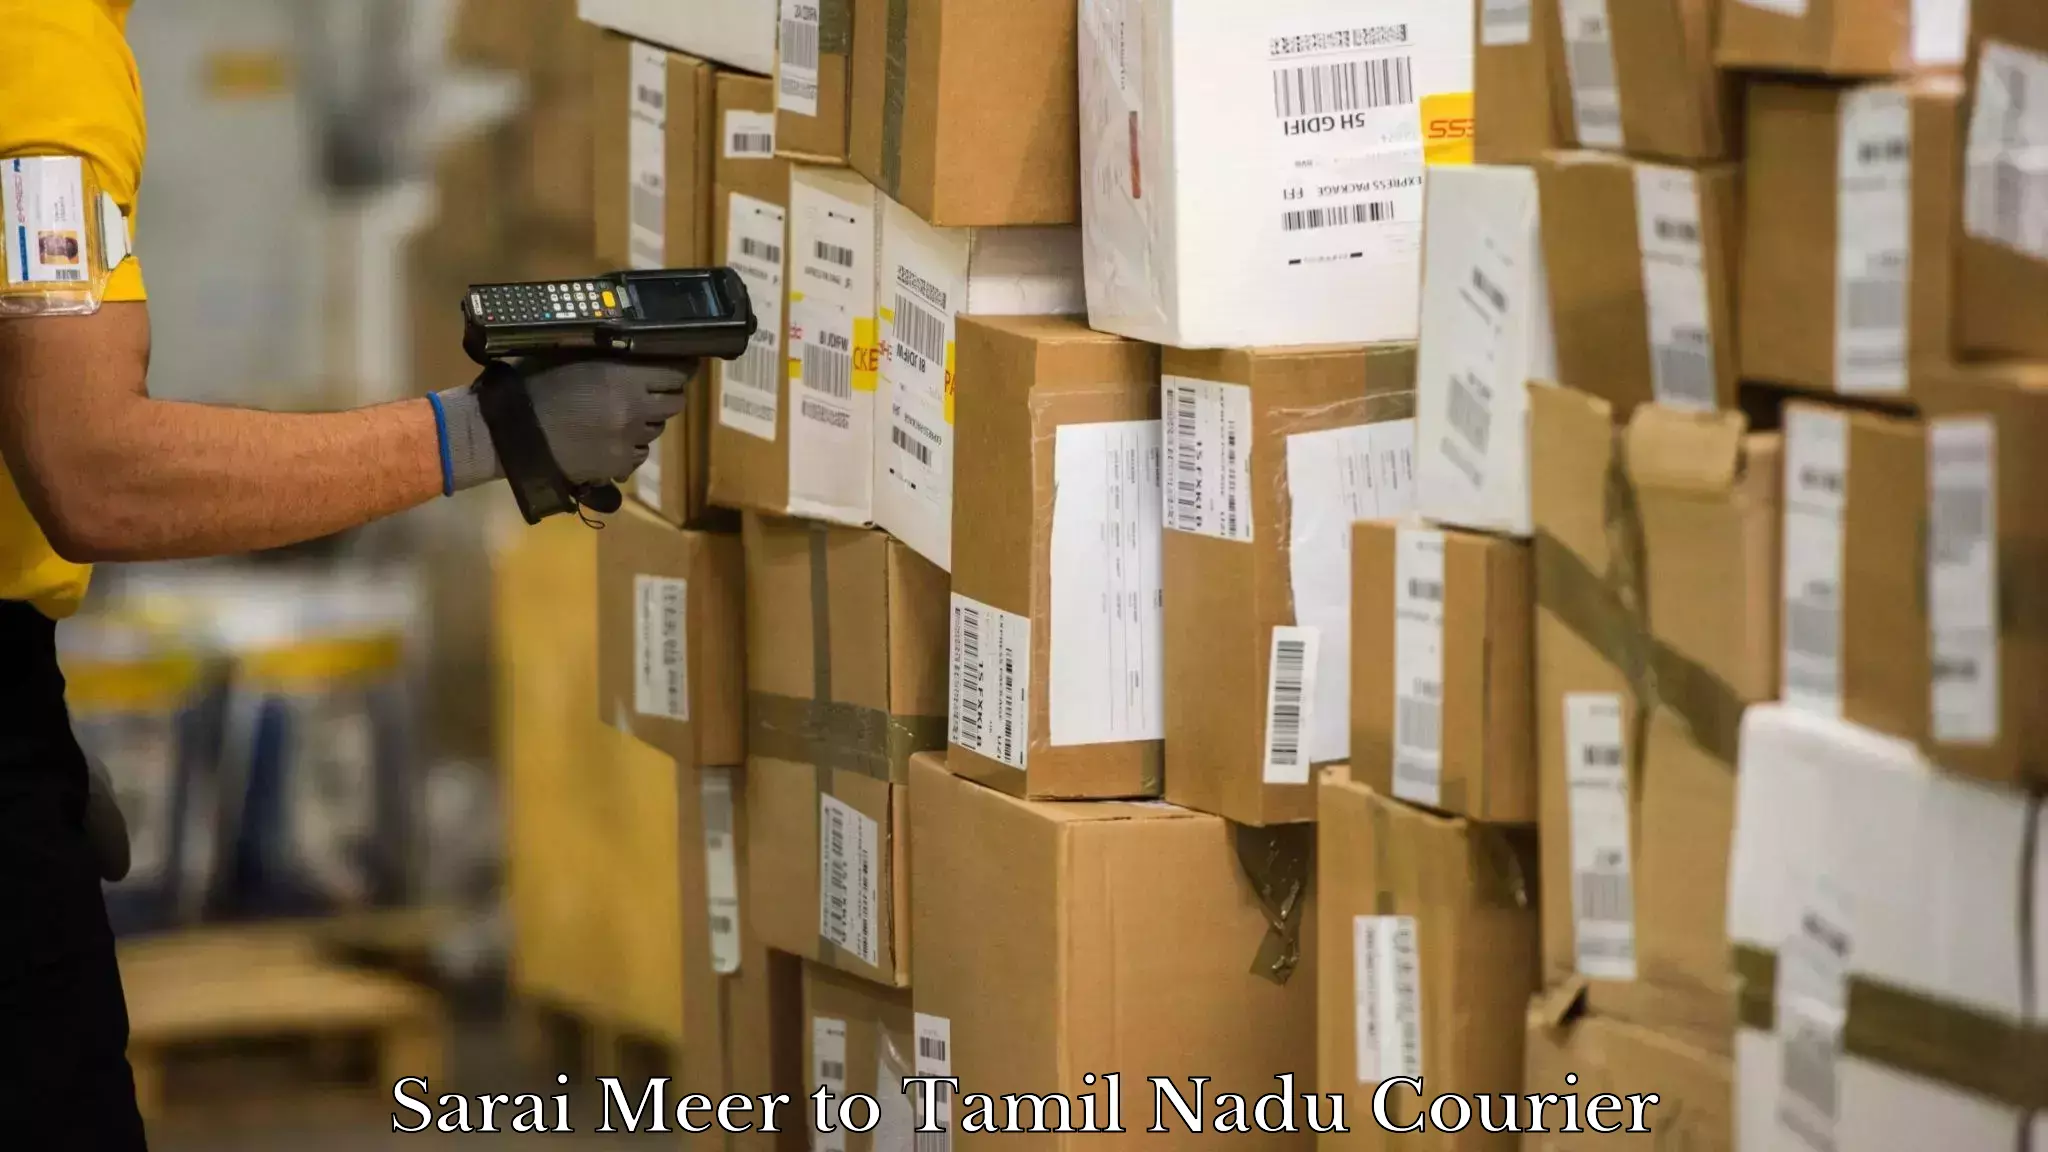 Nationwide courier service Sarai Meer to Tamil Nadu